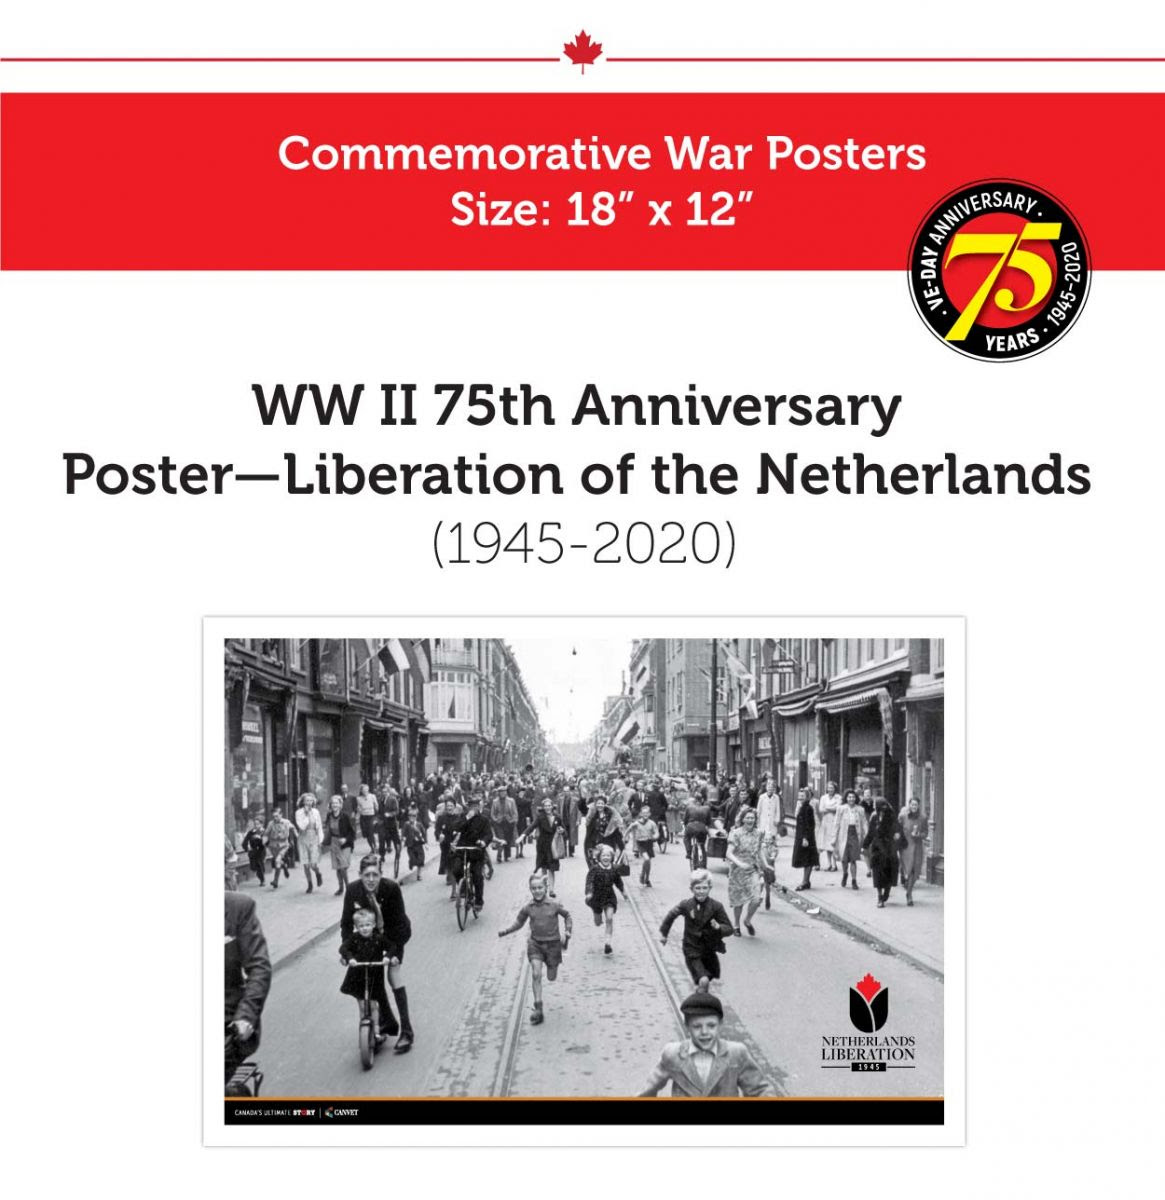 Commemorative Posters from the Second World War